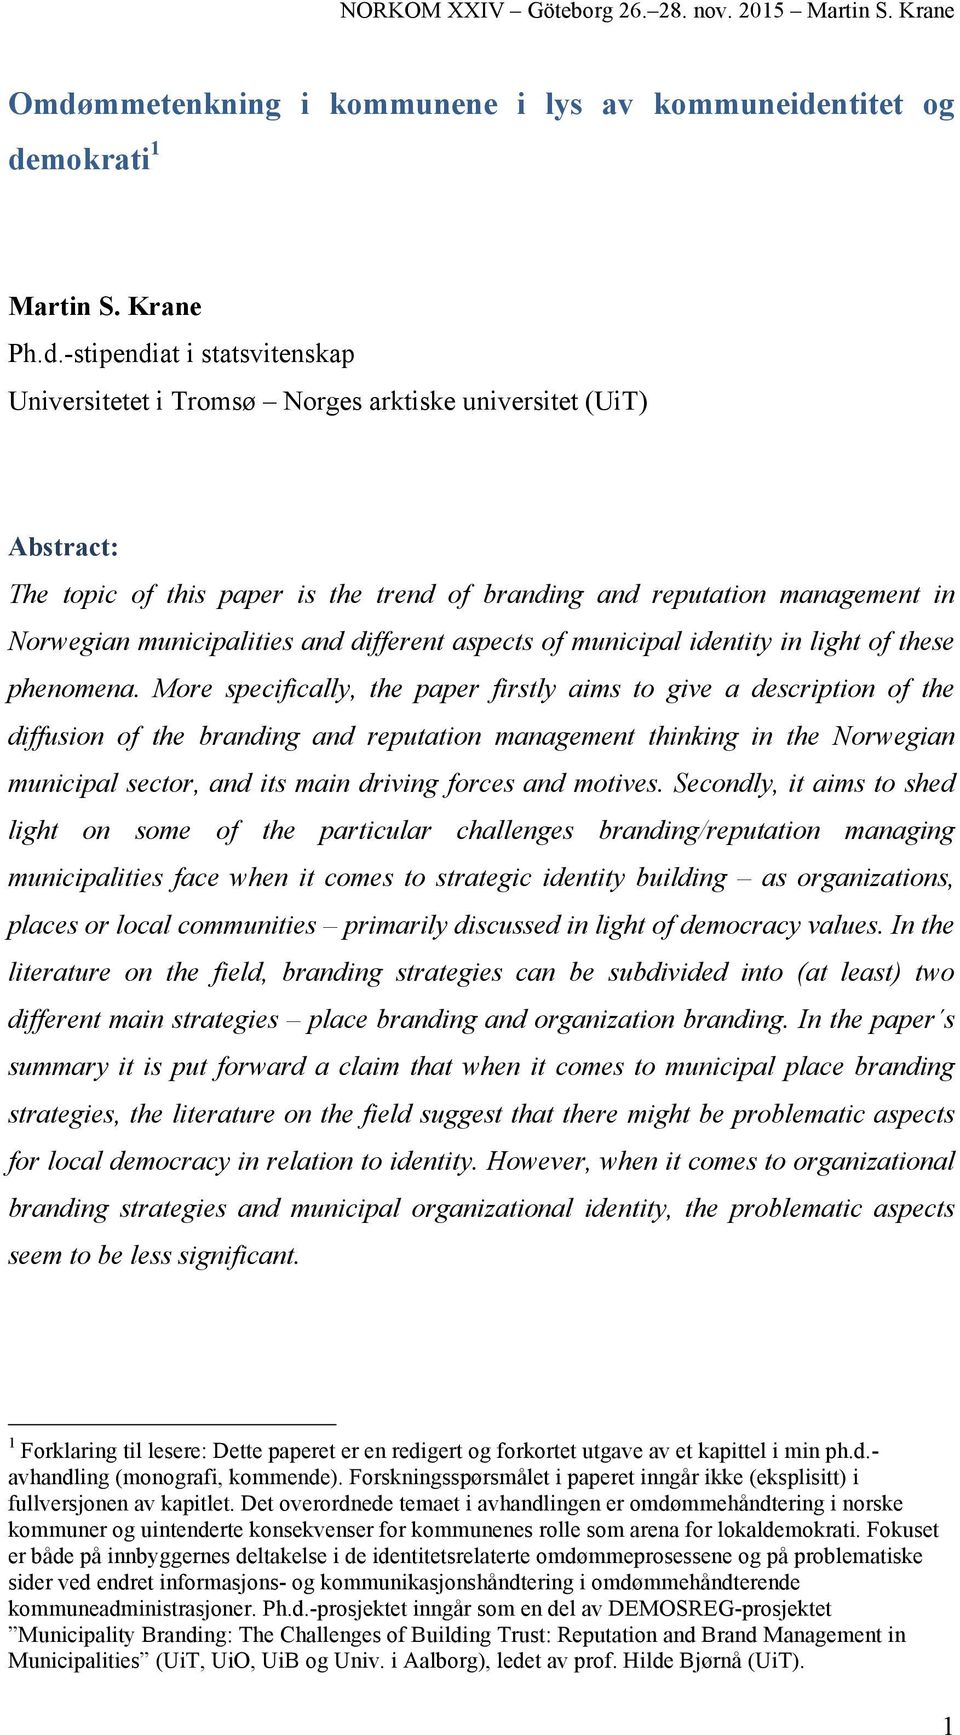 More specifically, the paper firstly aims to give a description of the diffusion of the branding and reputation management thinking in the Norwegian municipal sector, and its main driving forces and